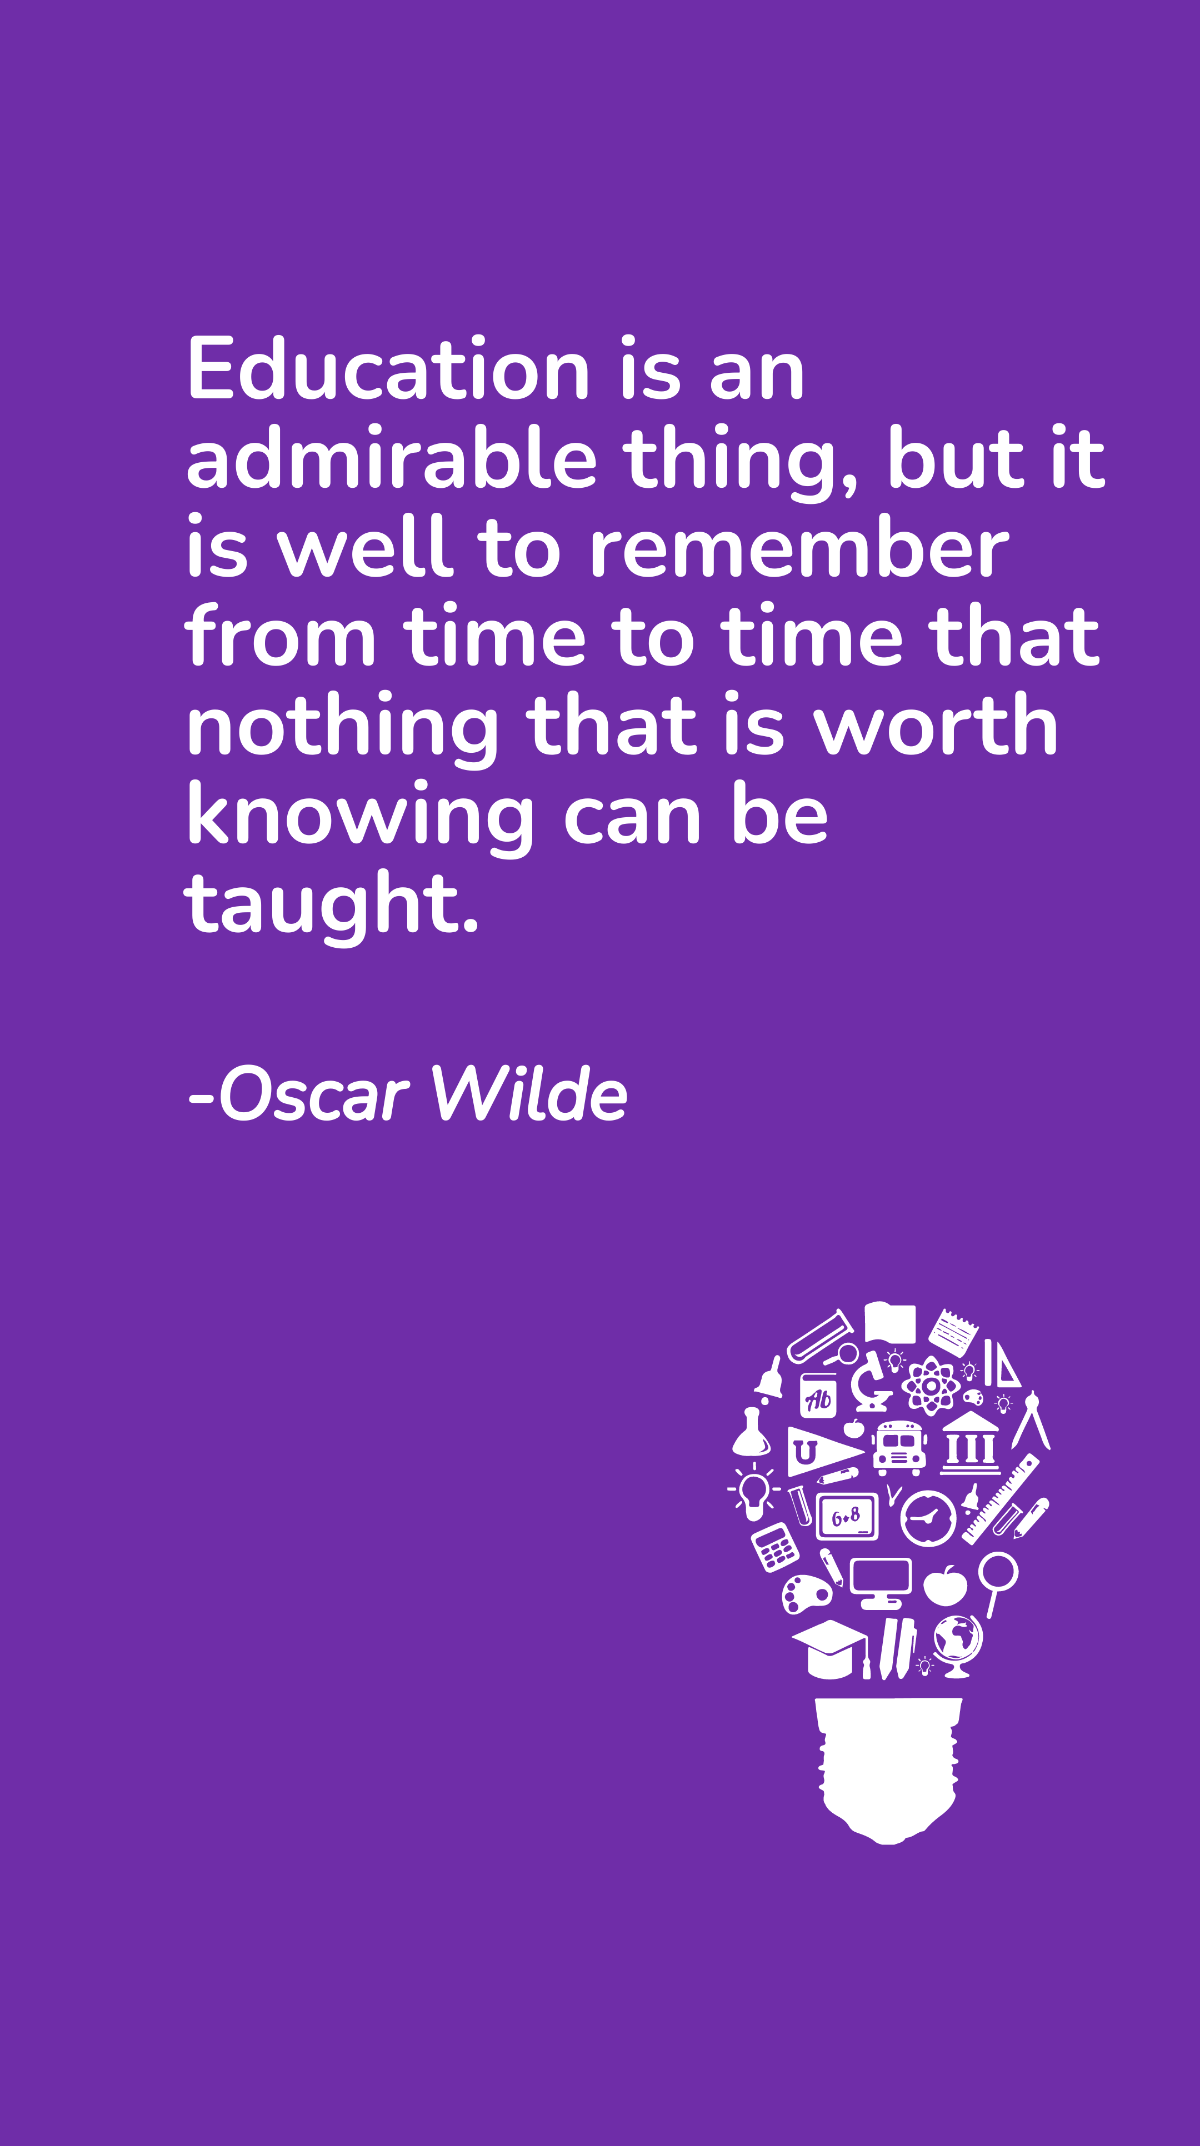 Oscar Wilde -Education is an admirable thing, but it is well to remember from time to time that nothing that is worth knowing can be taught. Template